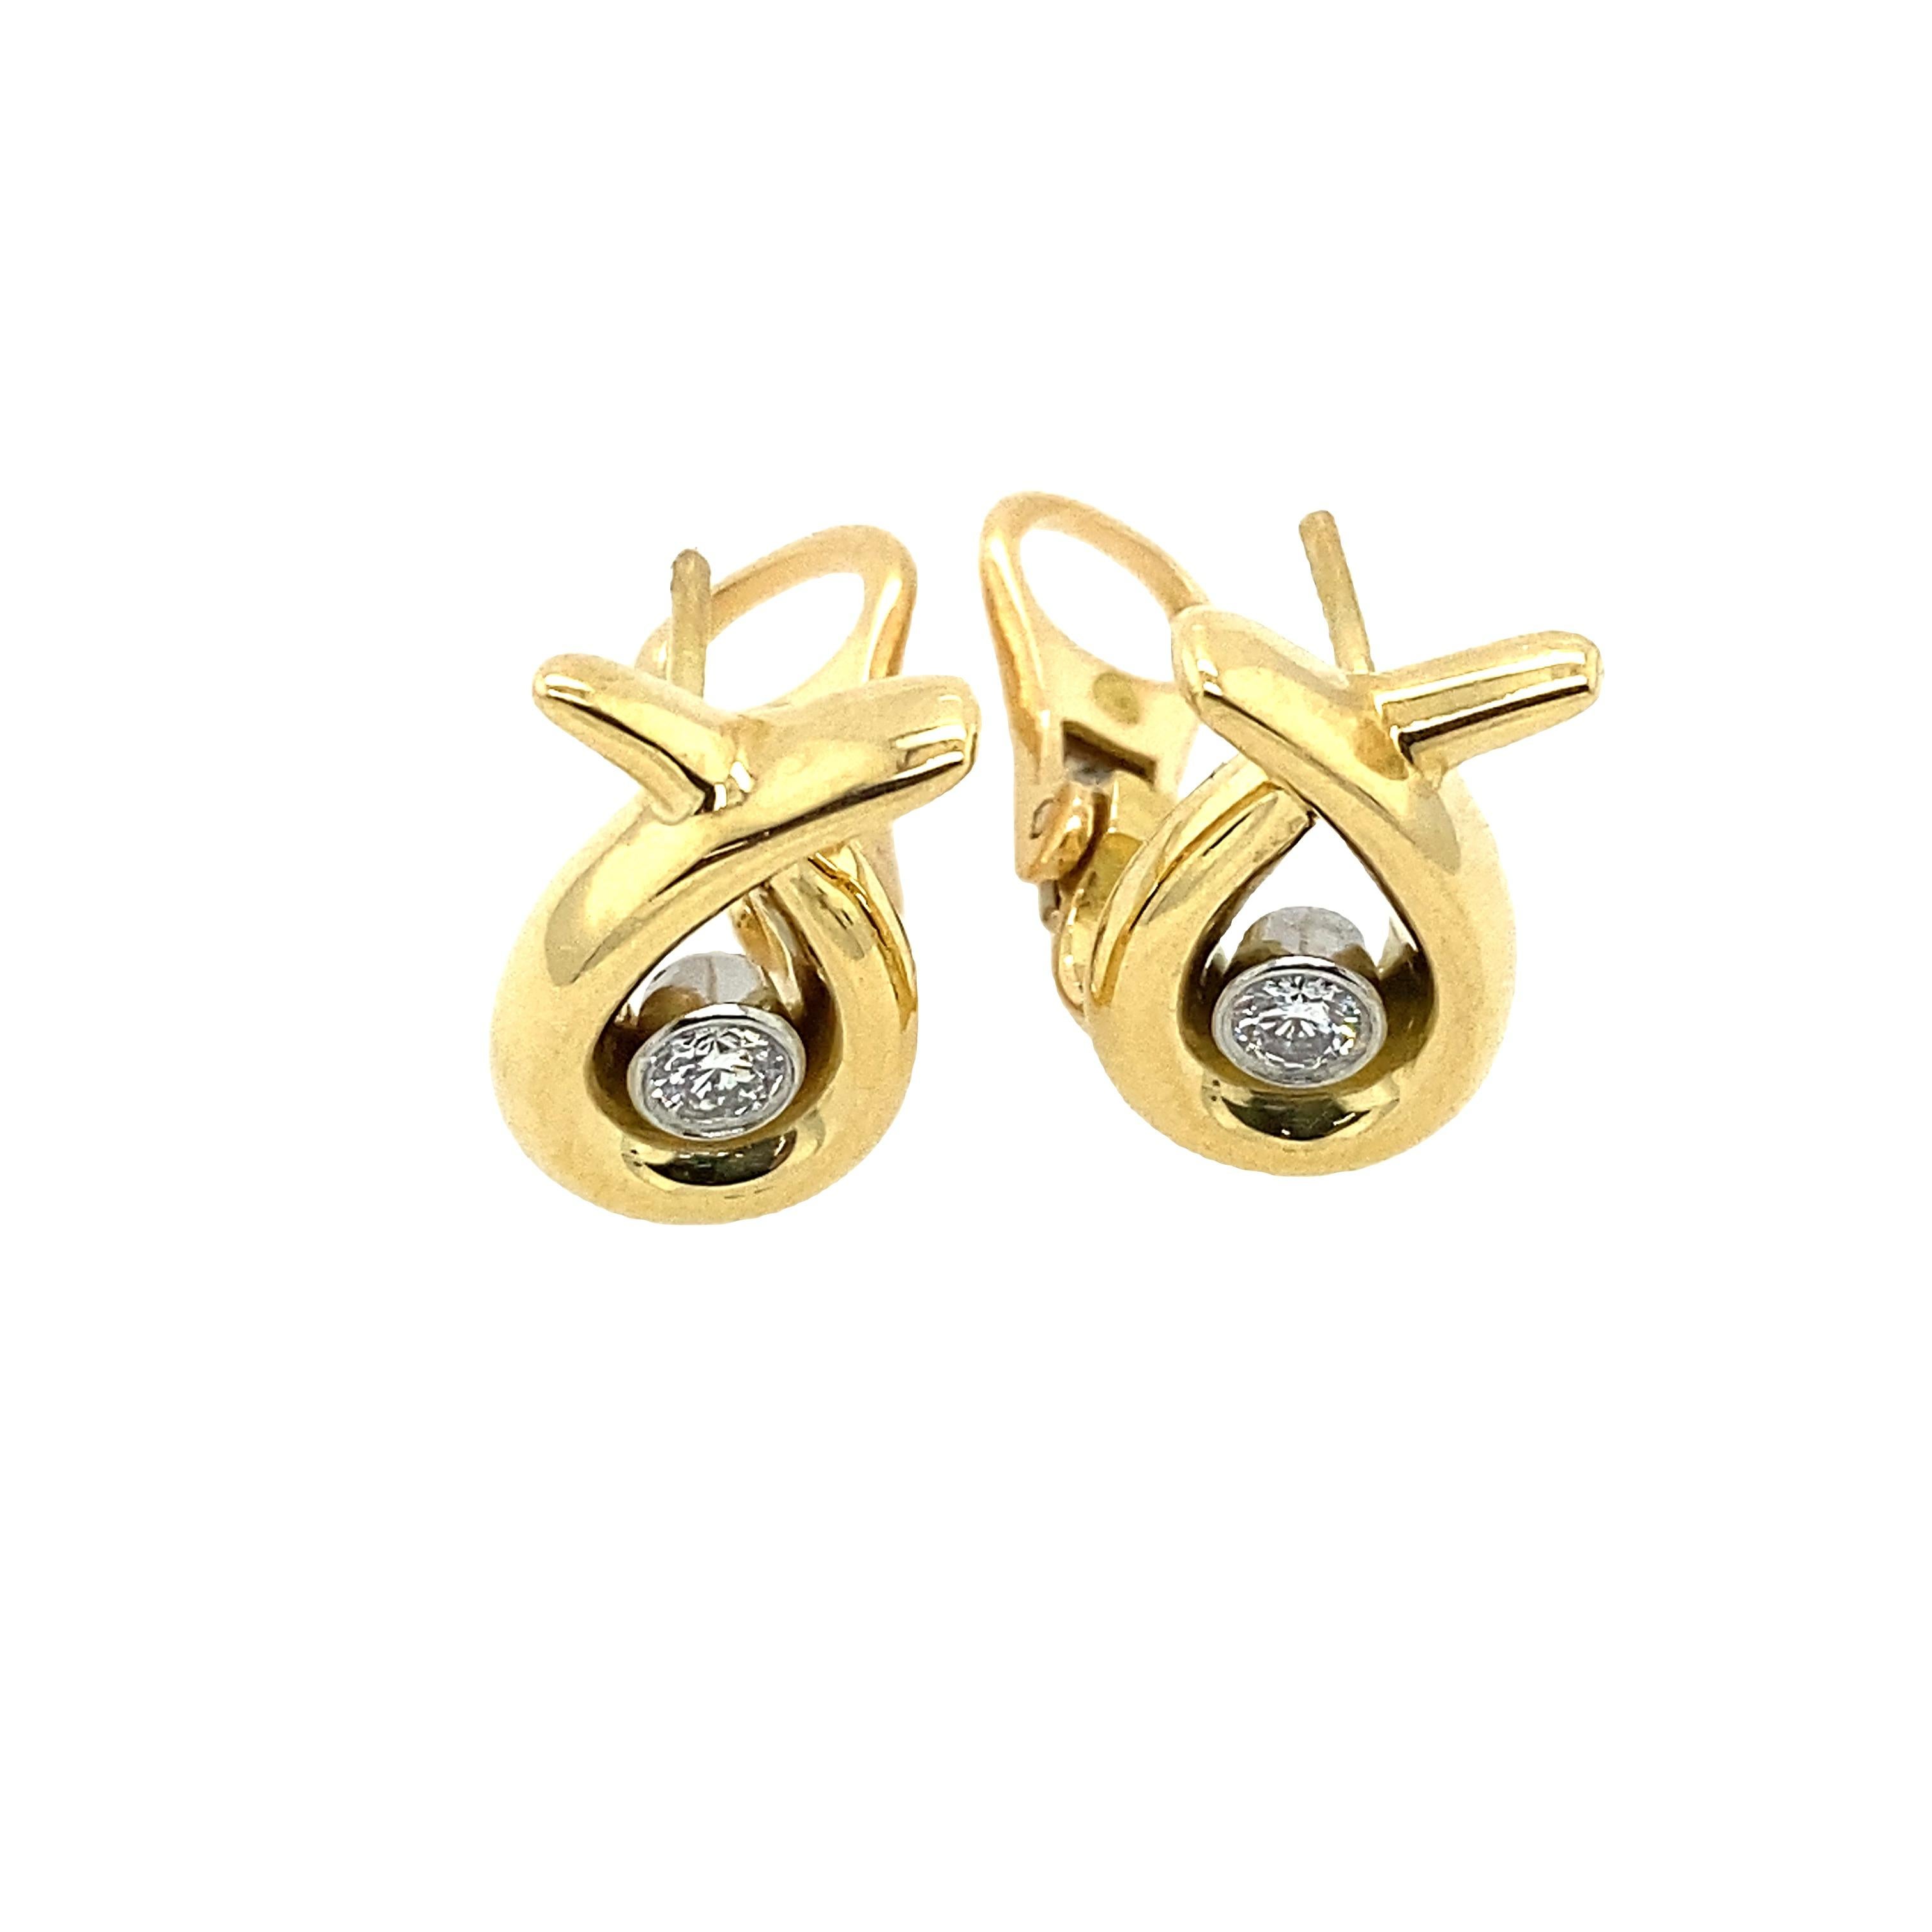 This Asprey pair of earrings was designed to be perfect for everyday earrings or occasions. 
It features a total of 0.20ct diamonds mounted on an 18ct yellow gold beautiful setting.
Earrings Dimension: 15mm x 9mm
Total Diamond Weight: 0.20ct
Diamond